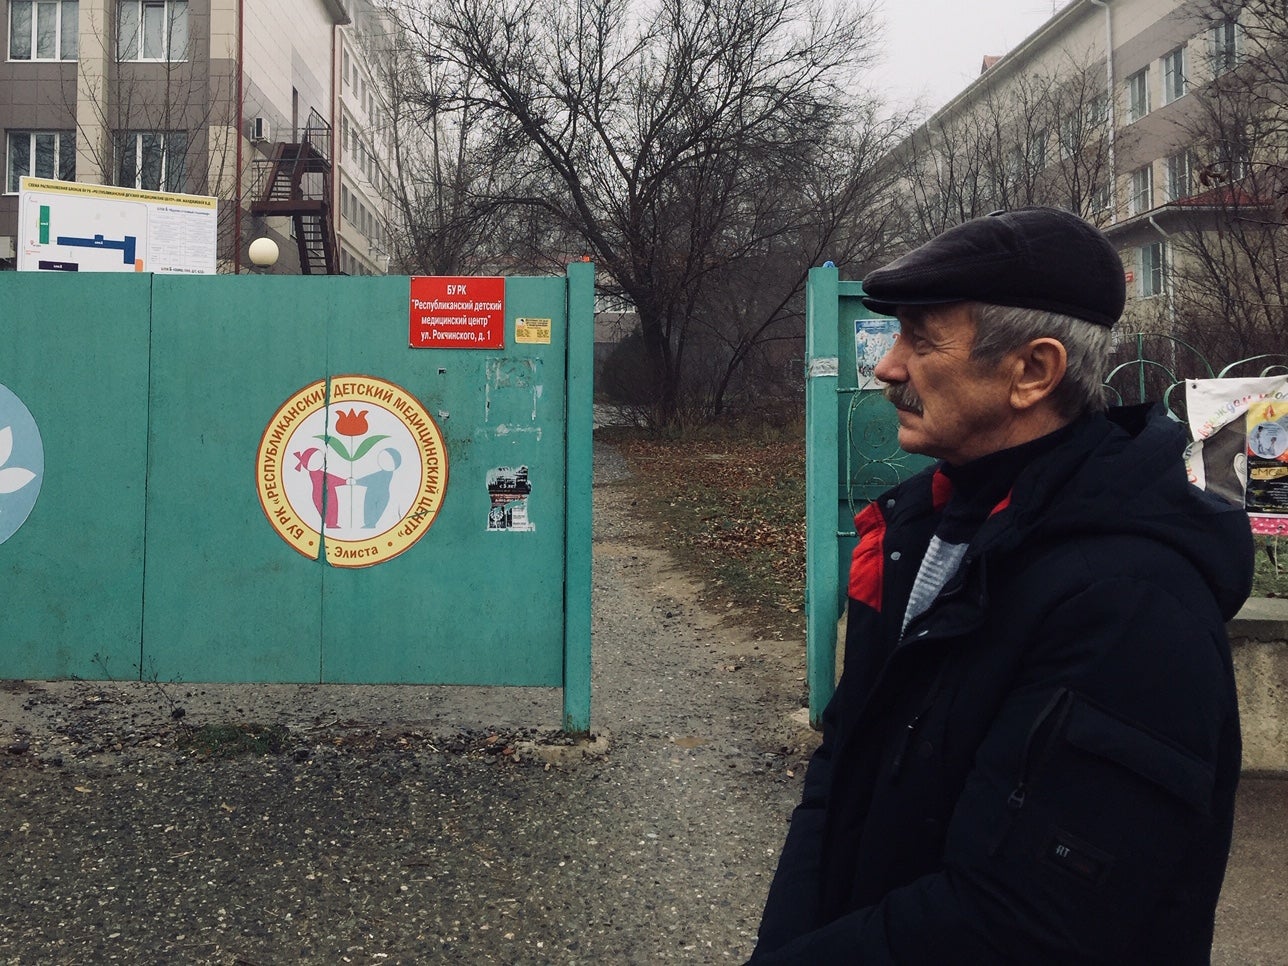 Alexander Gorobchenko stands in front of Elista’s children’s hospital where three decades ago his son Sergei was infected with HIV. Gorobchenko says the reaction of the local community “devastated” him and his family.